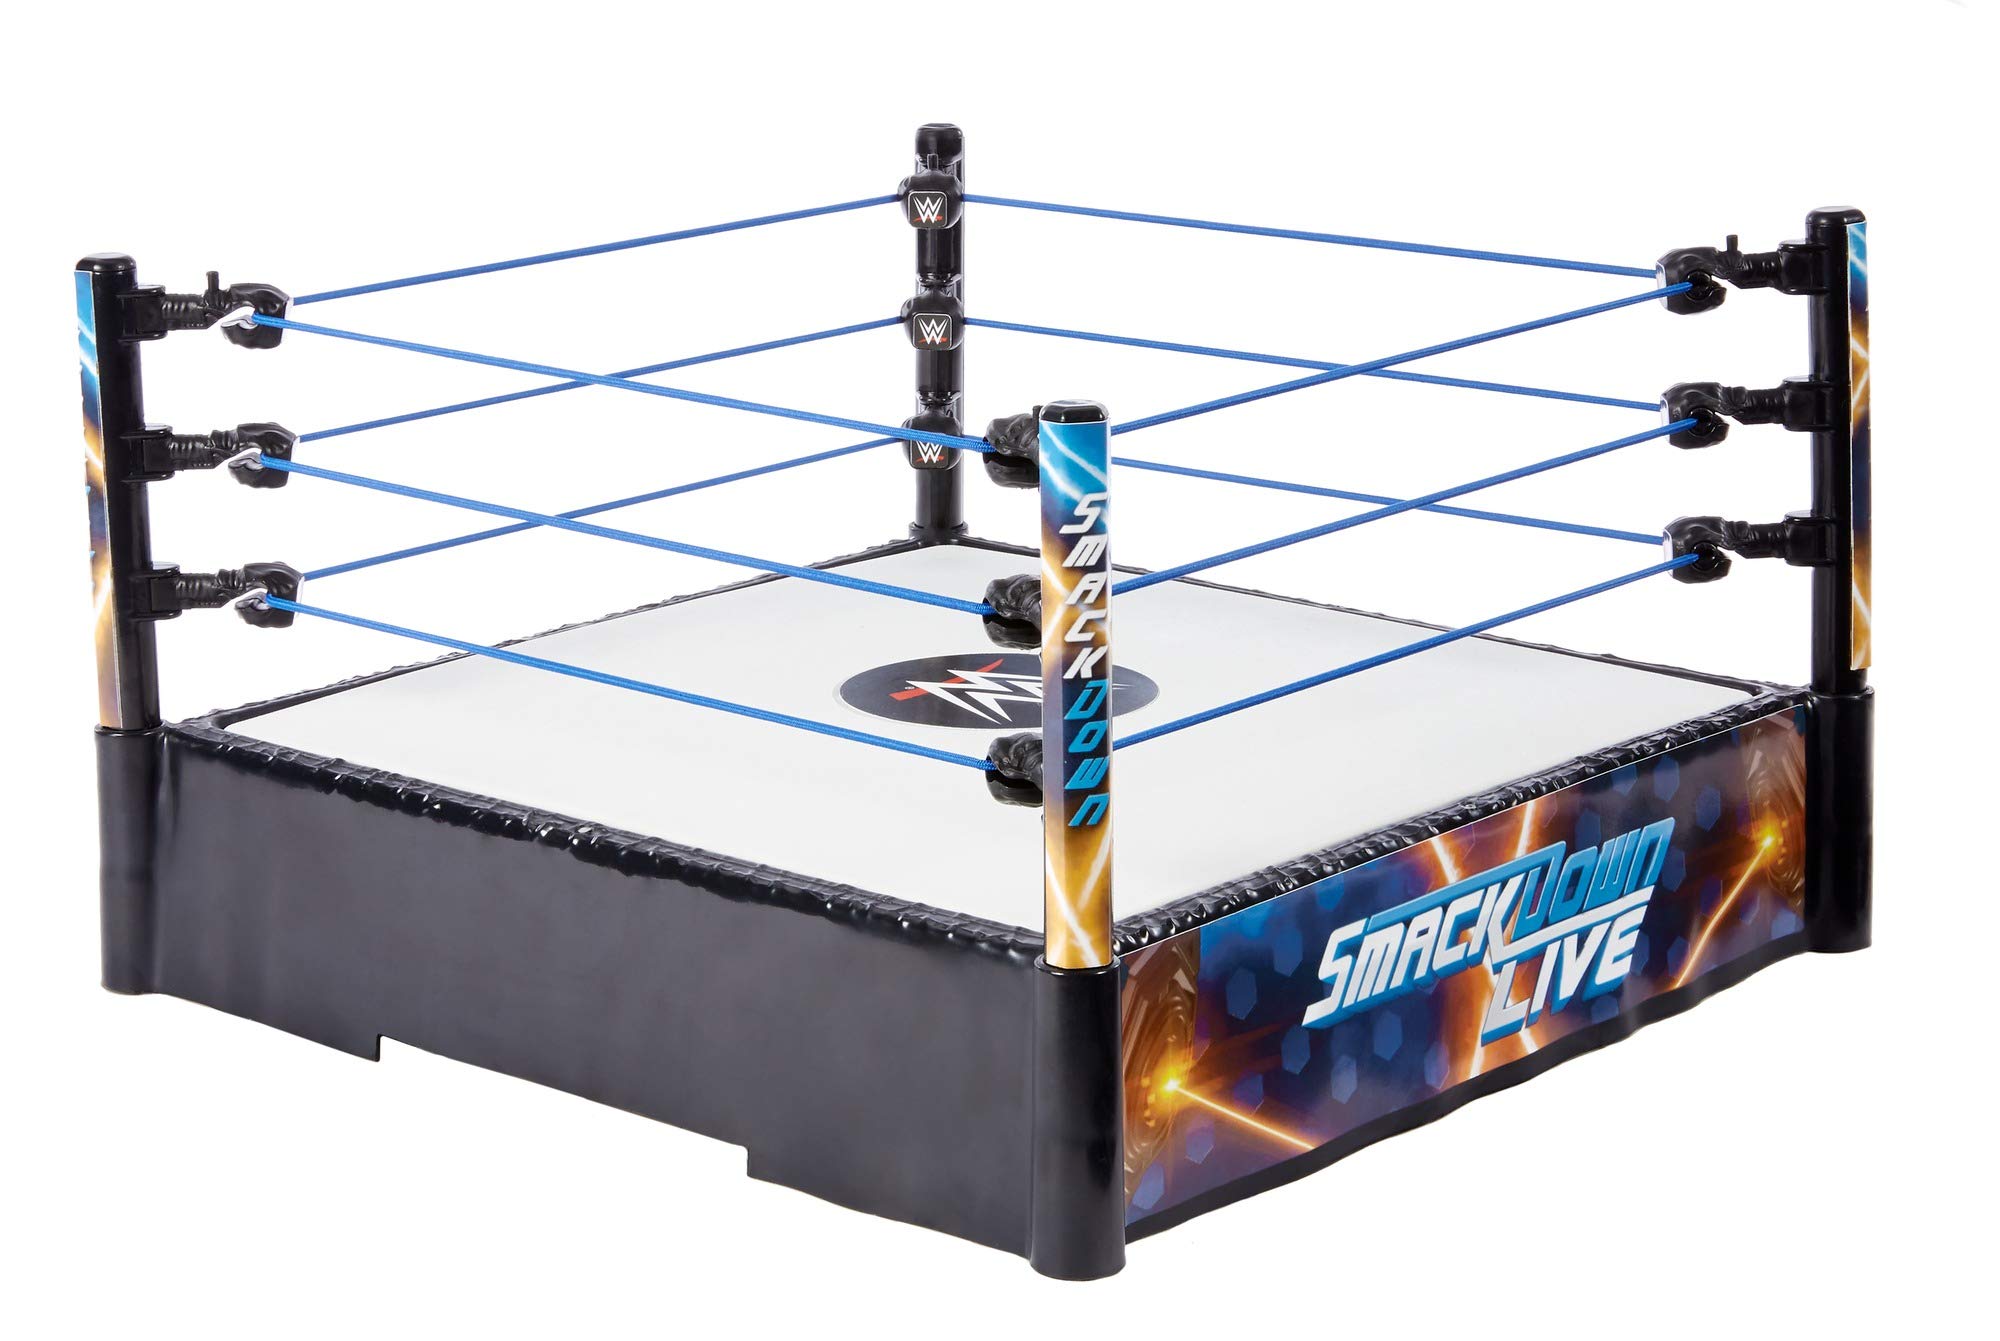 WWE Superstar 14-inch Ring with Authentic Decoration